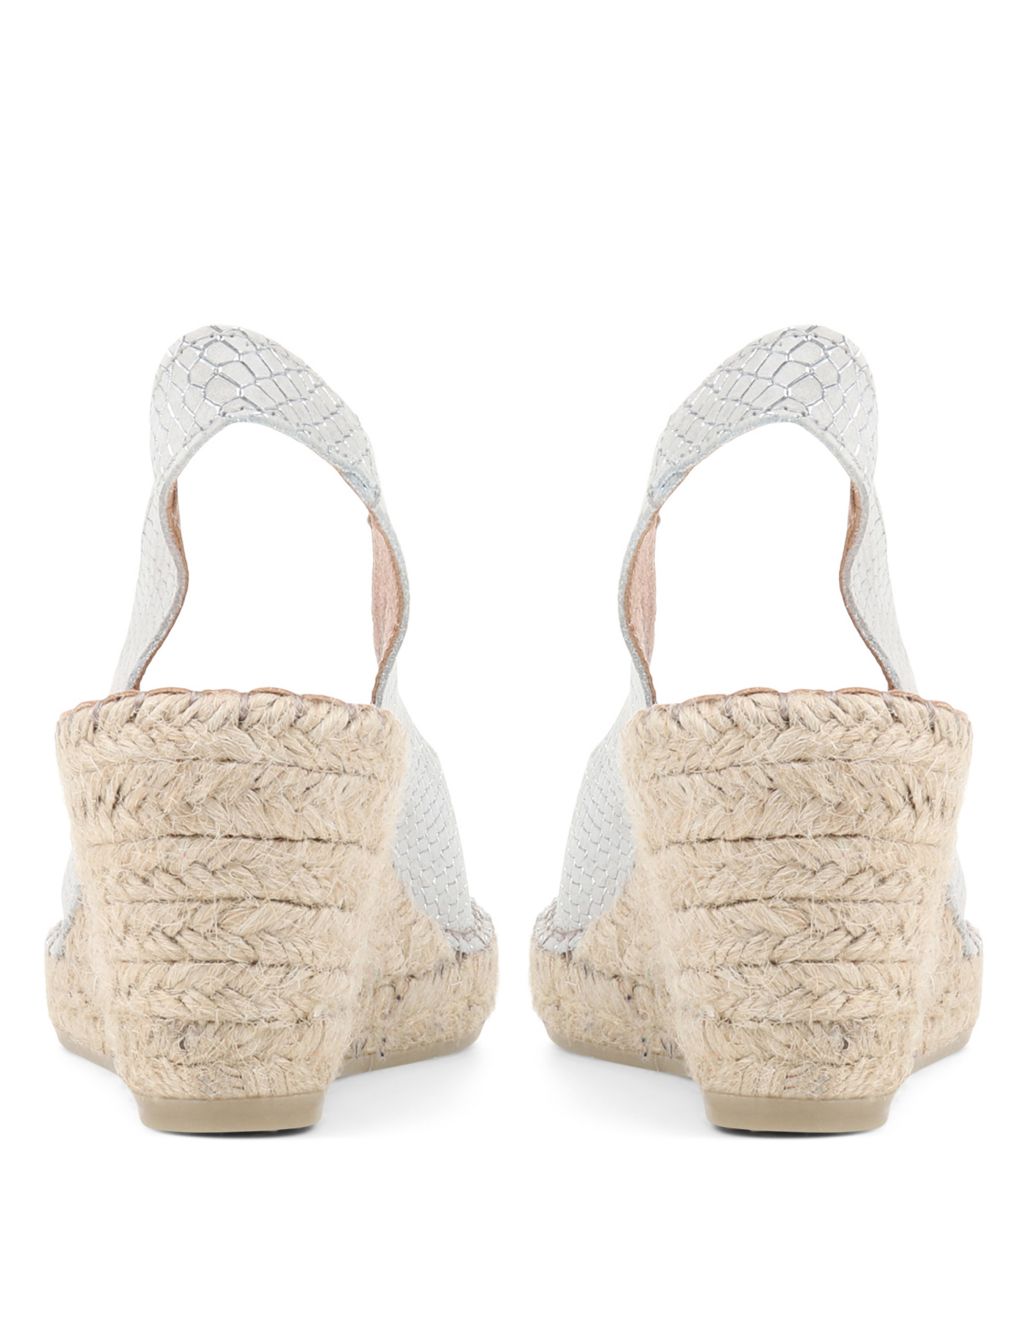 Suede Slingback Wedge Sandals 7 of 7